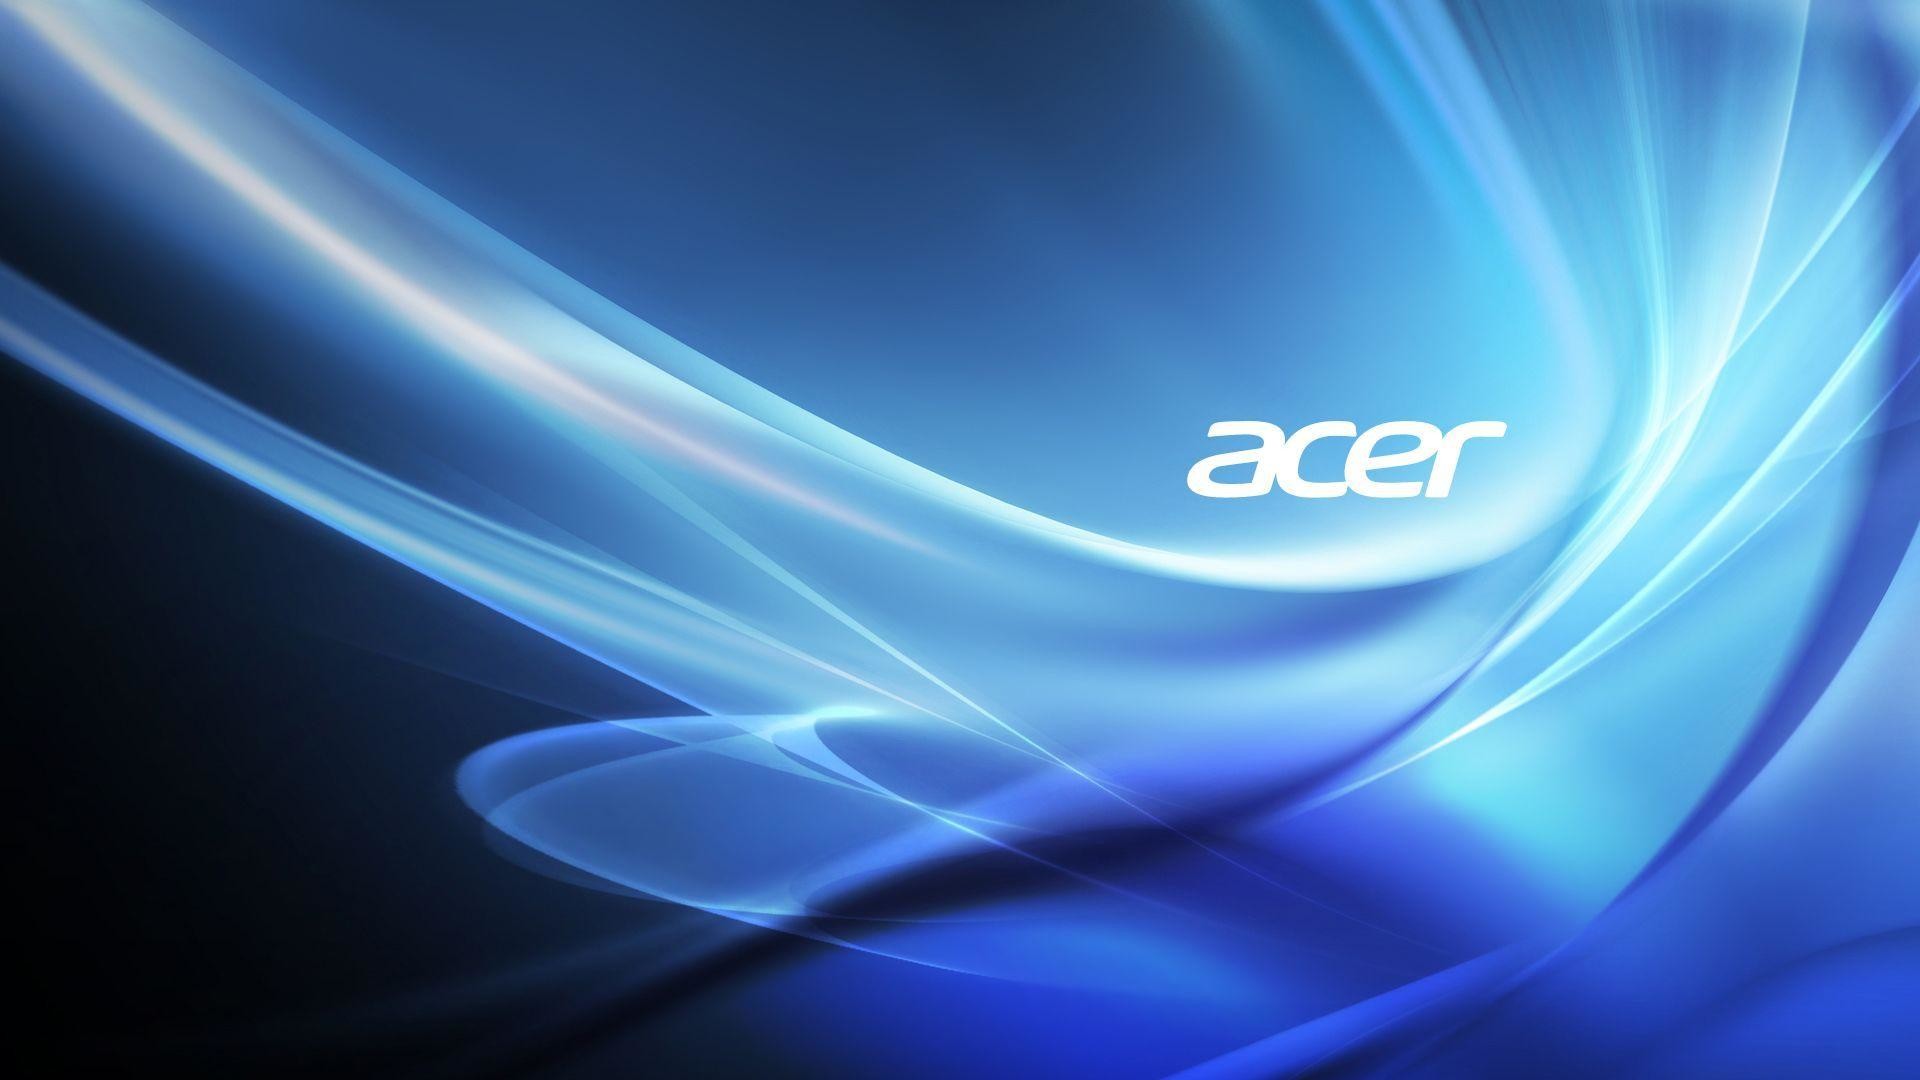 Acer Hd Wallpapers, Free Wallpaper Downloads, Acer - Acer Background - HD Wallpaper 